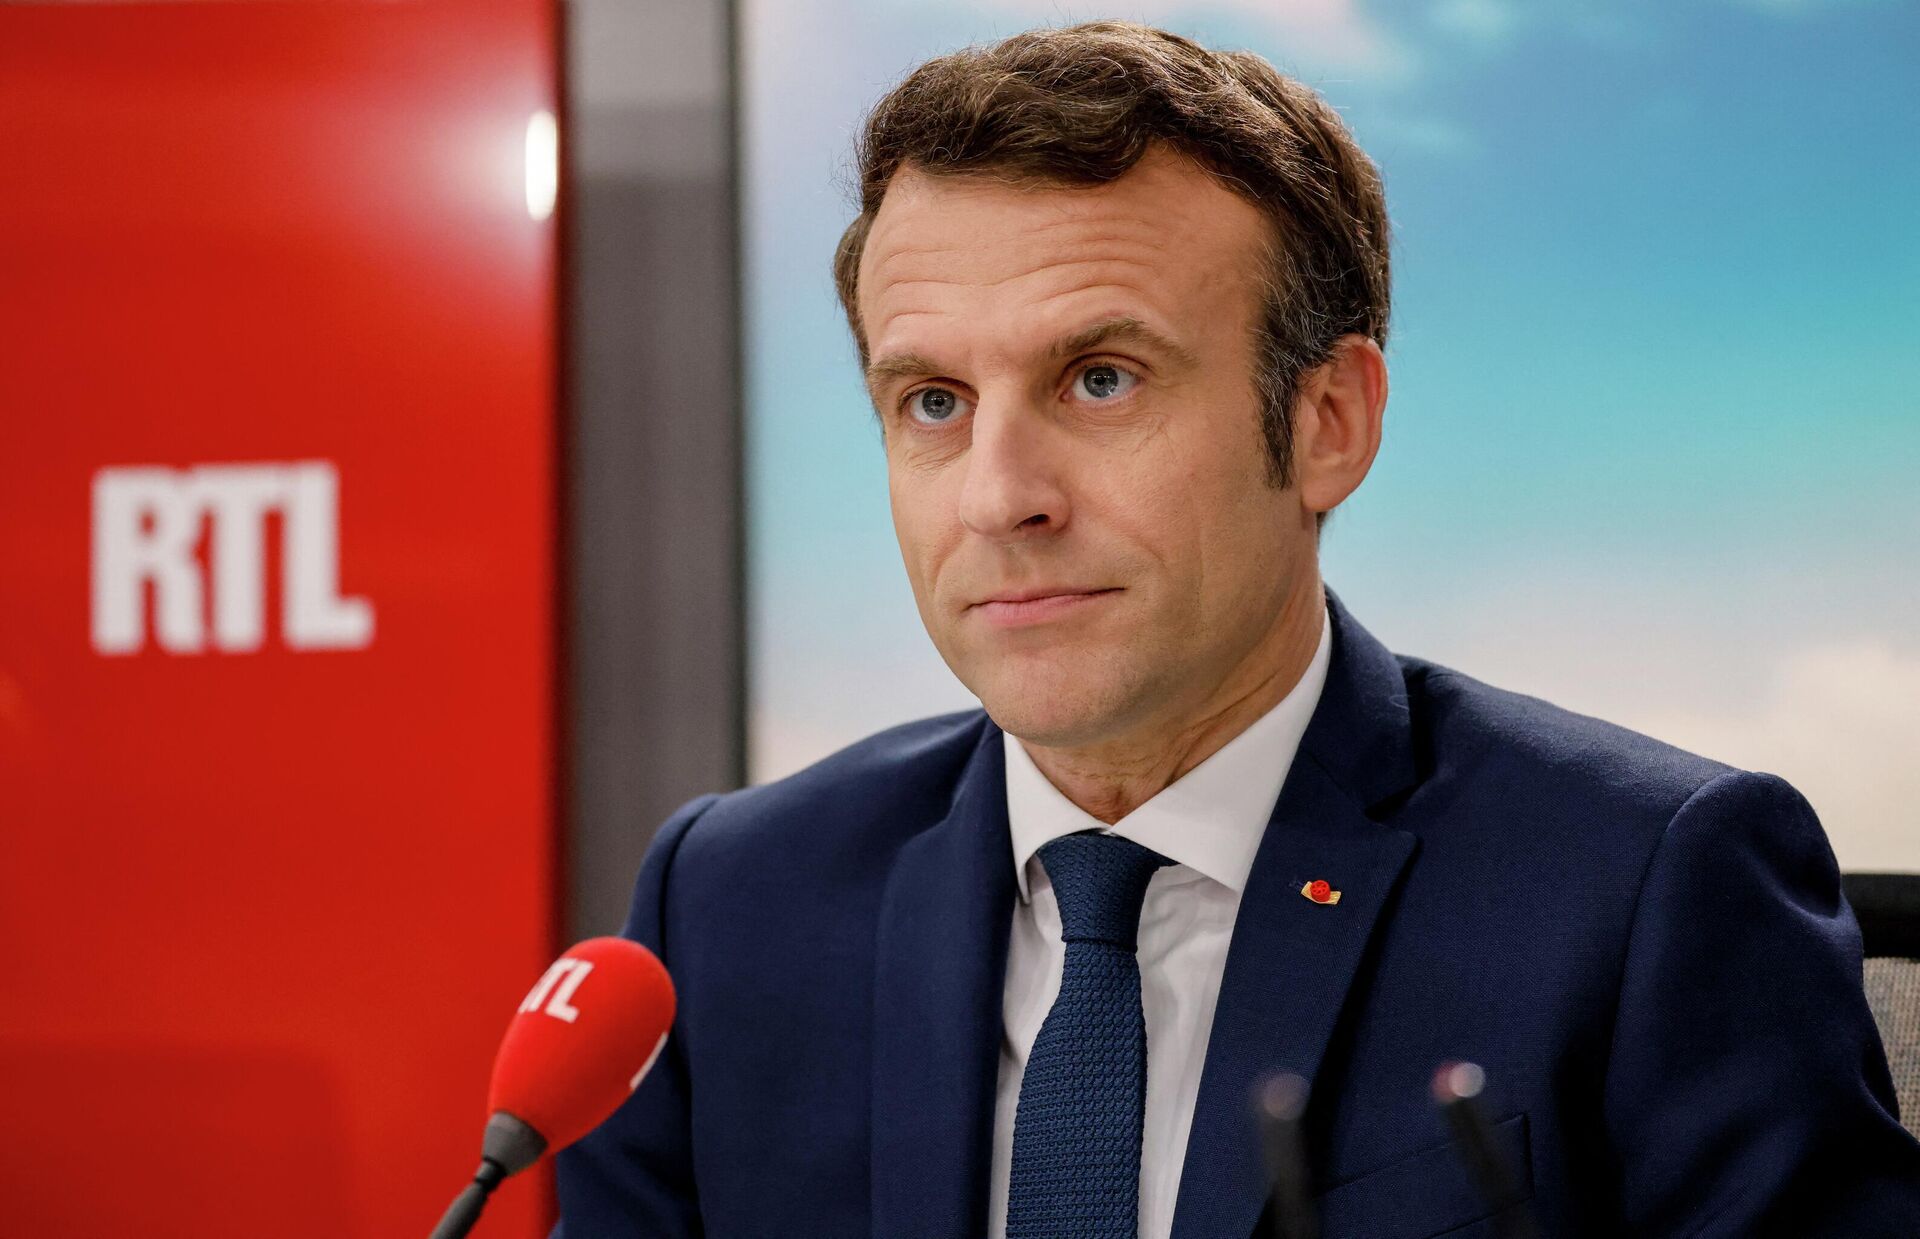 French President and liberal party La Republique en Marche (LREM) candidate for re-election Emmanuel Macron poses before a live interview on the set of French private radio station RTL in Neuilly-sur-Seine on April 8, 2022, as part of his political campaign two days before the first round of the French presidential election. - Sputnik International, 1920, 24.07.2022